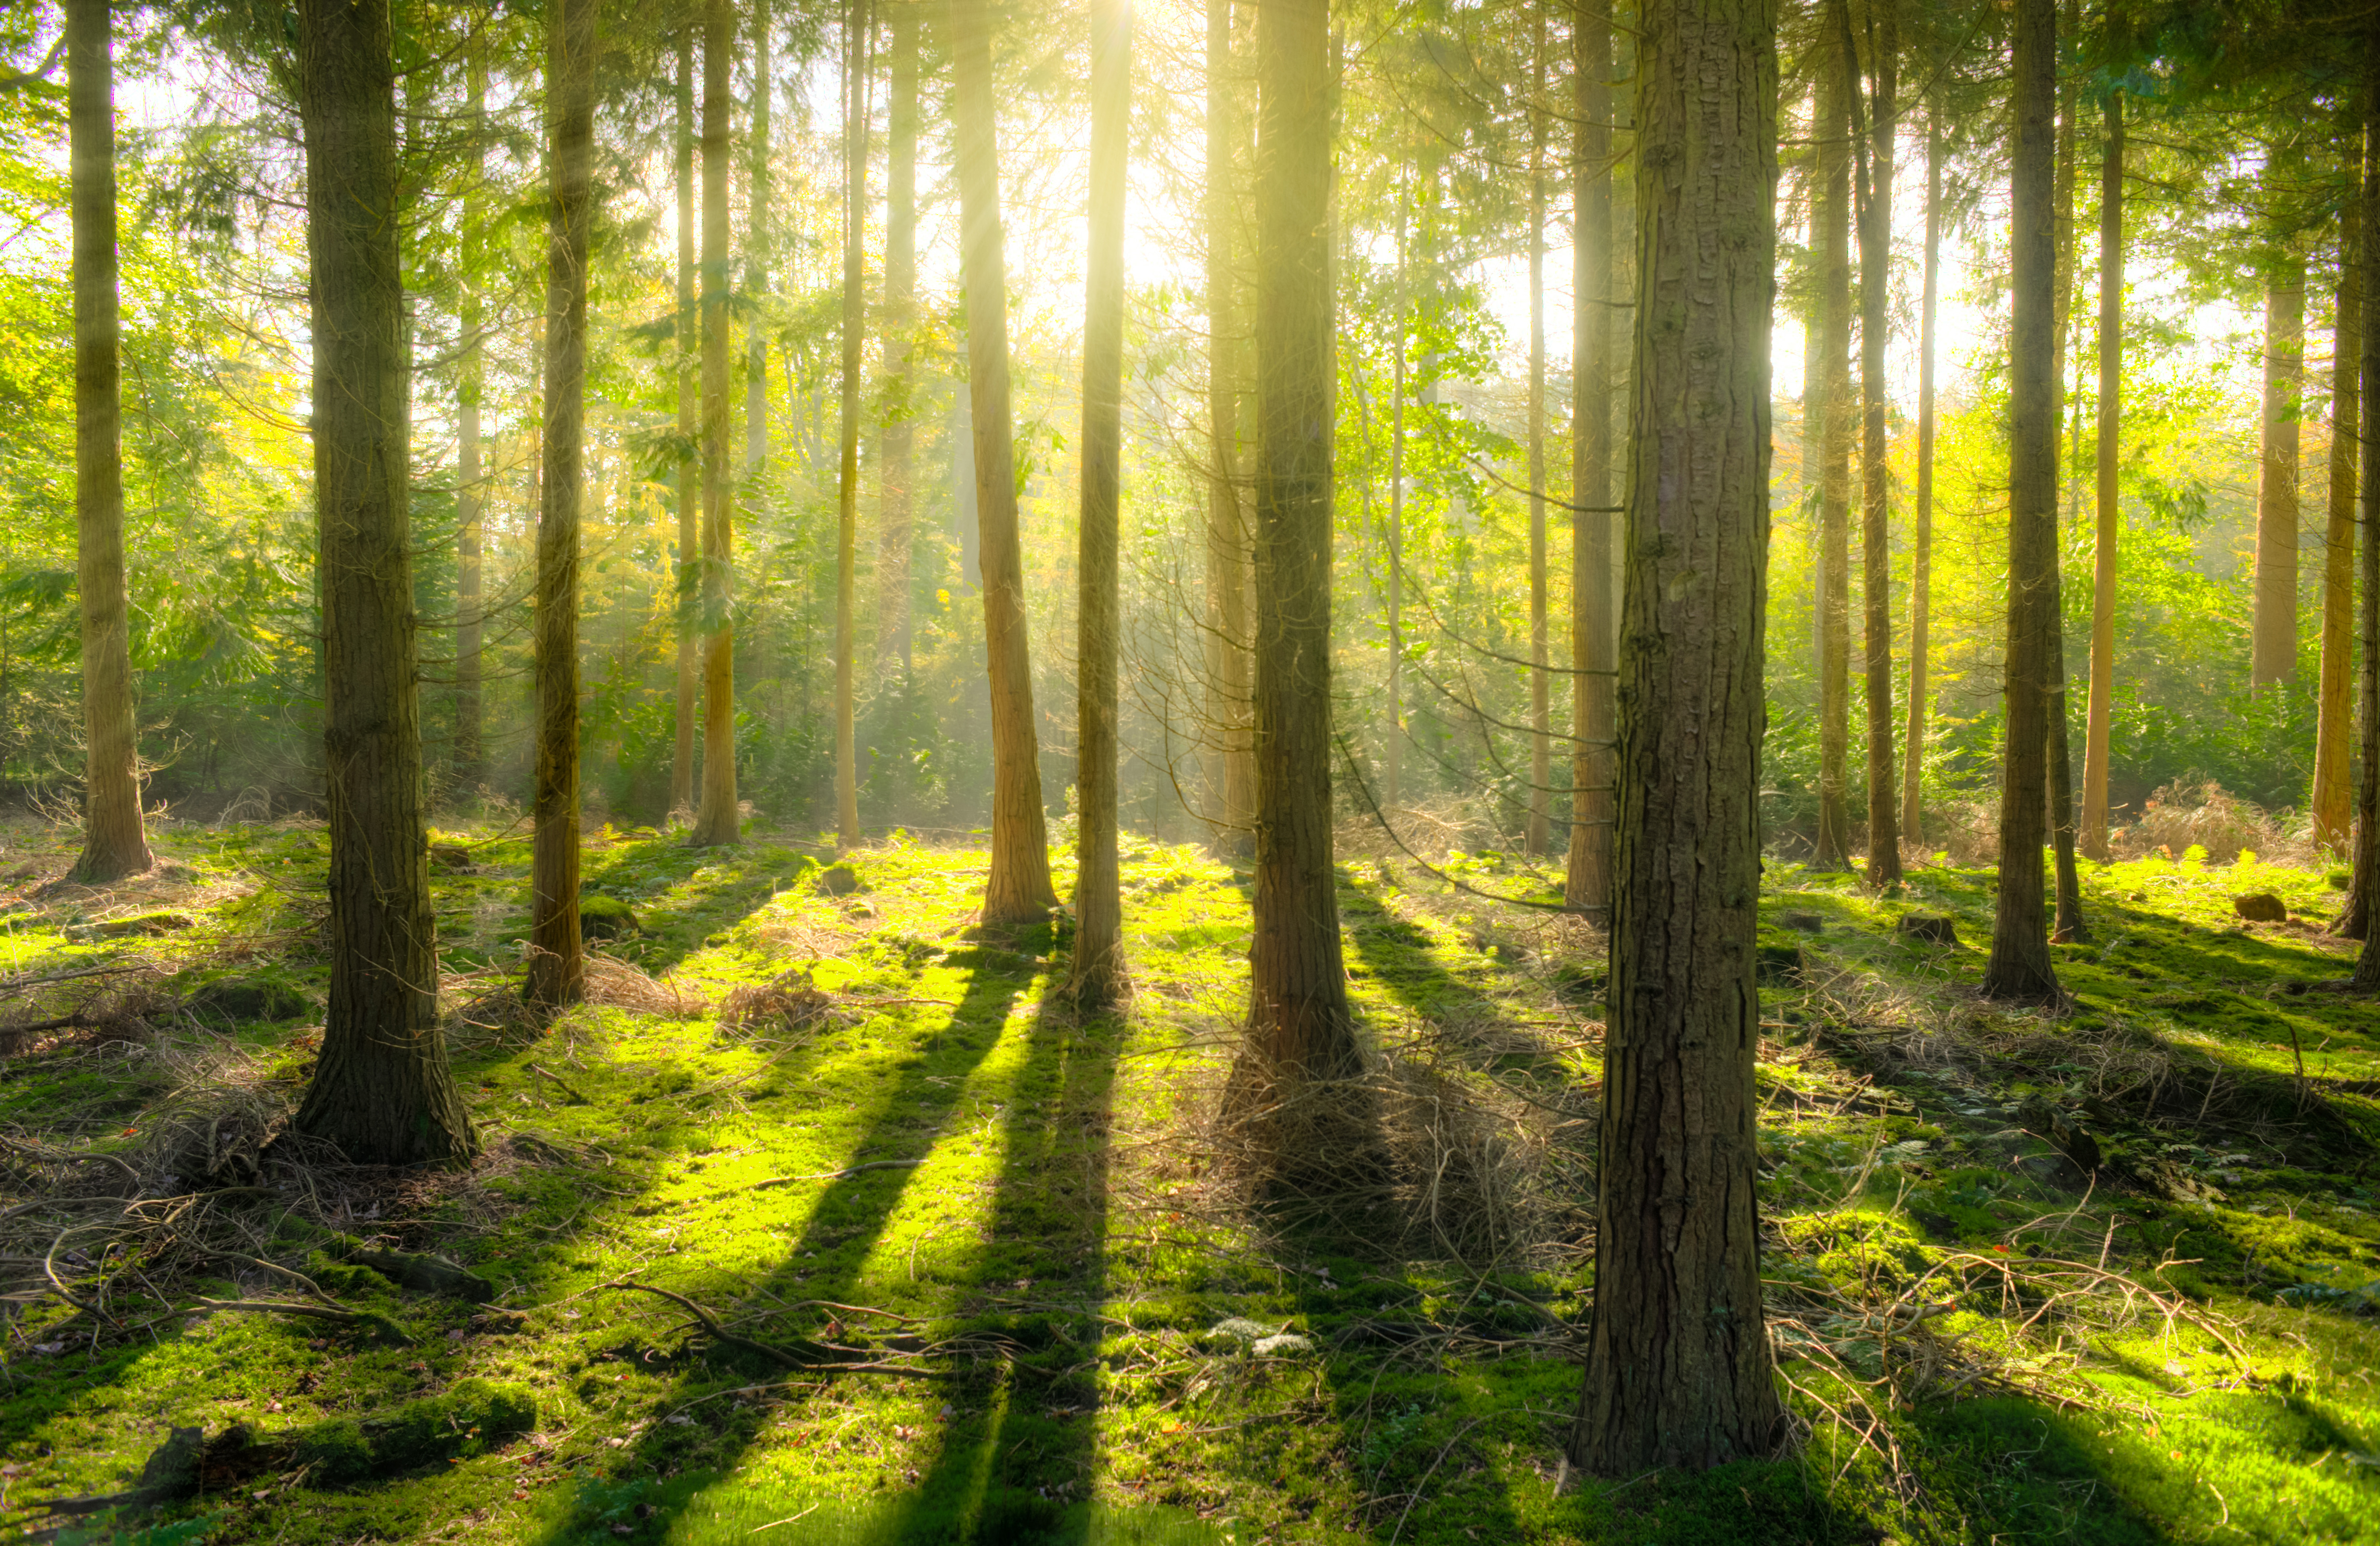 Light shining through the trees in the forest image - Free stock ...